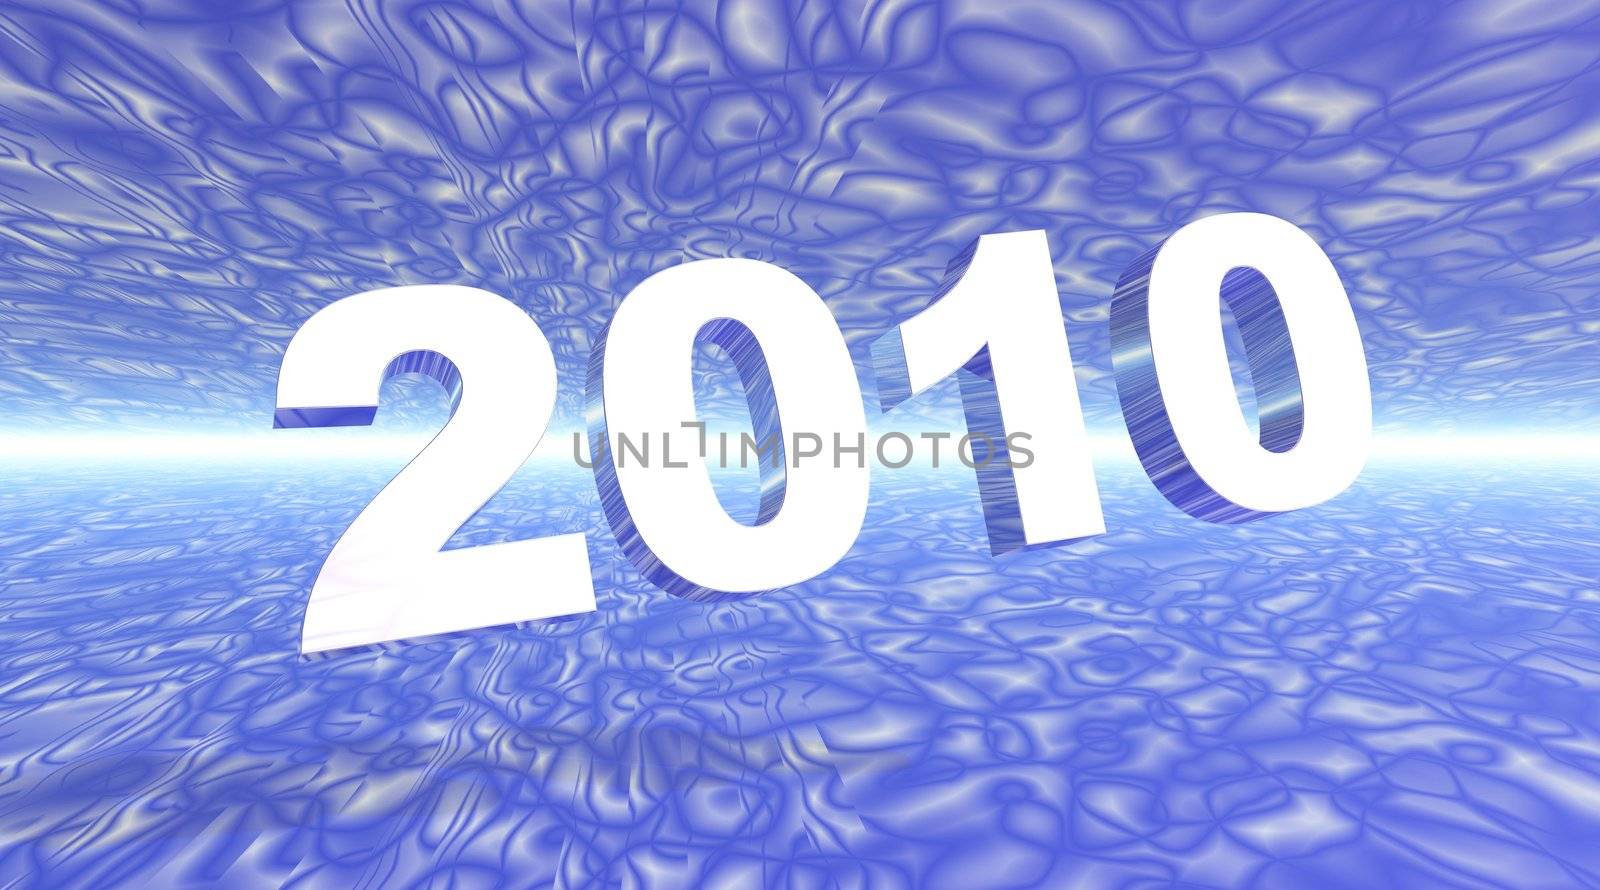 2010 white on psychedelic blue by Elenaphotos21